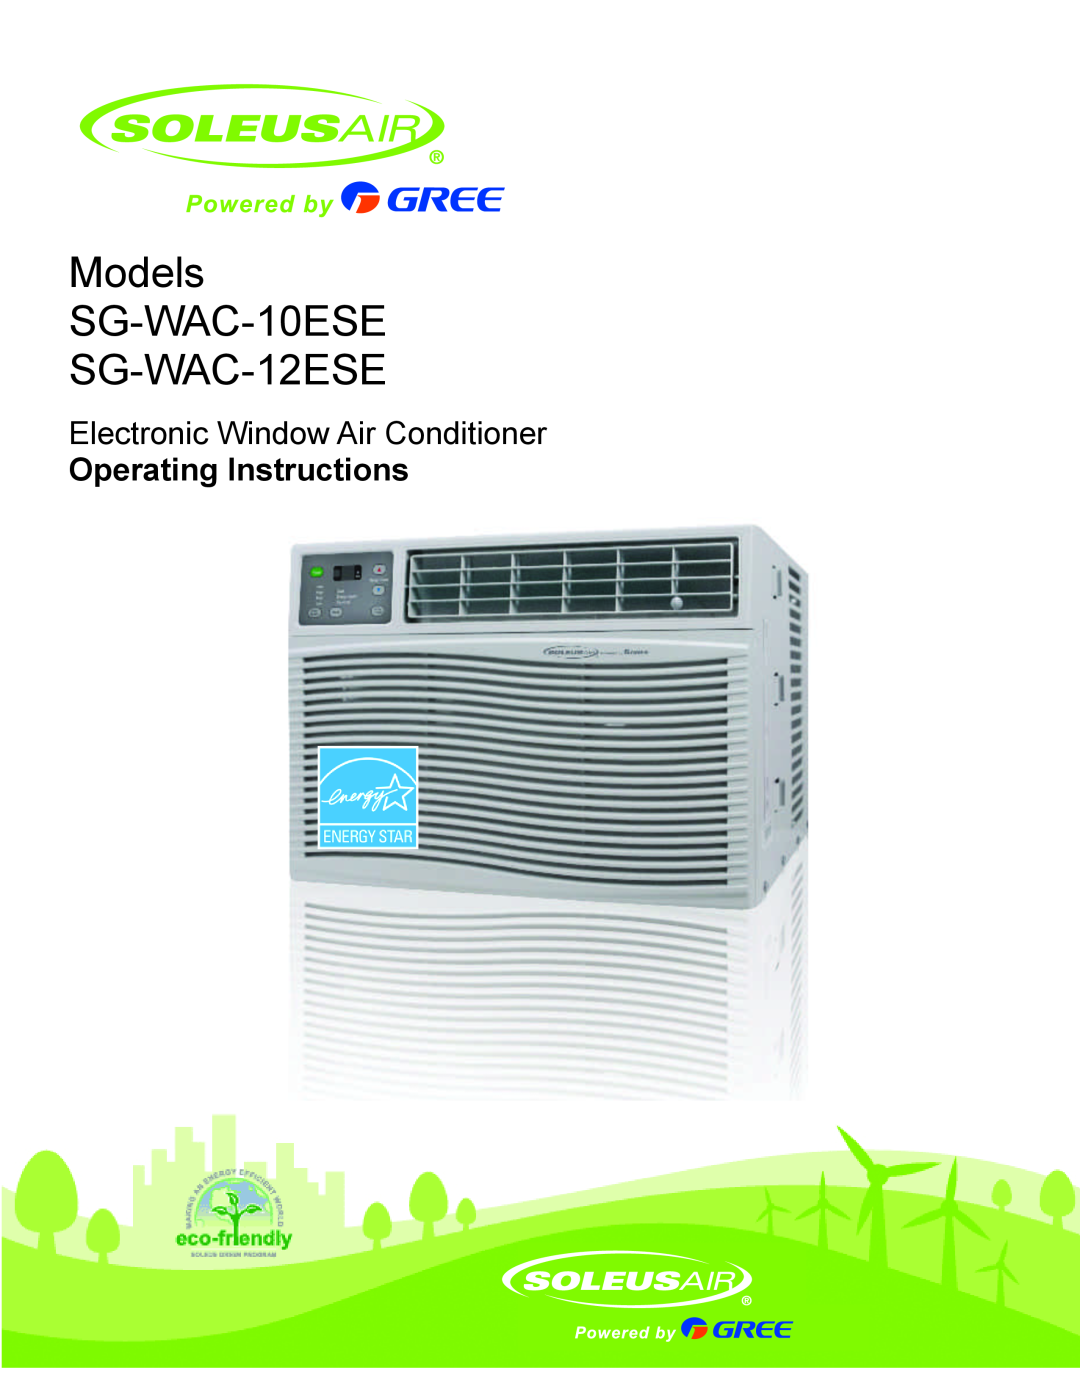 Soleus Air manual Models SG-WAC-10ESE SG-WAC-12ESE, Electronic Window Air Conditioner, Operating Instructions 